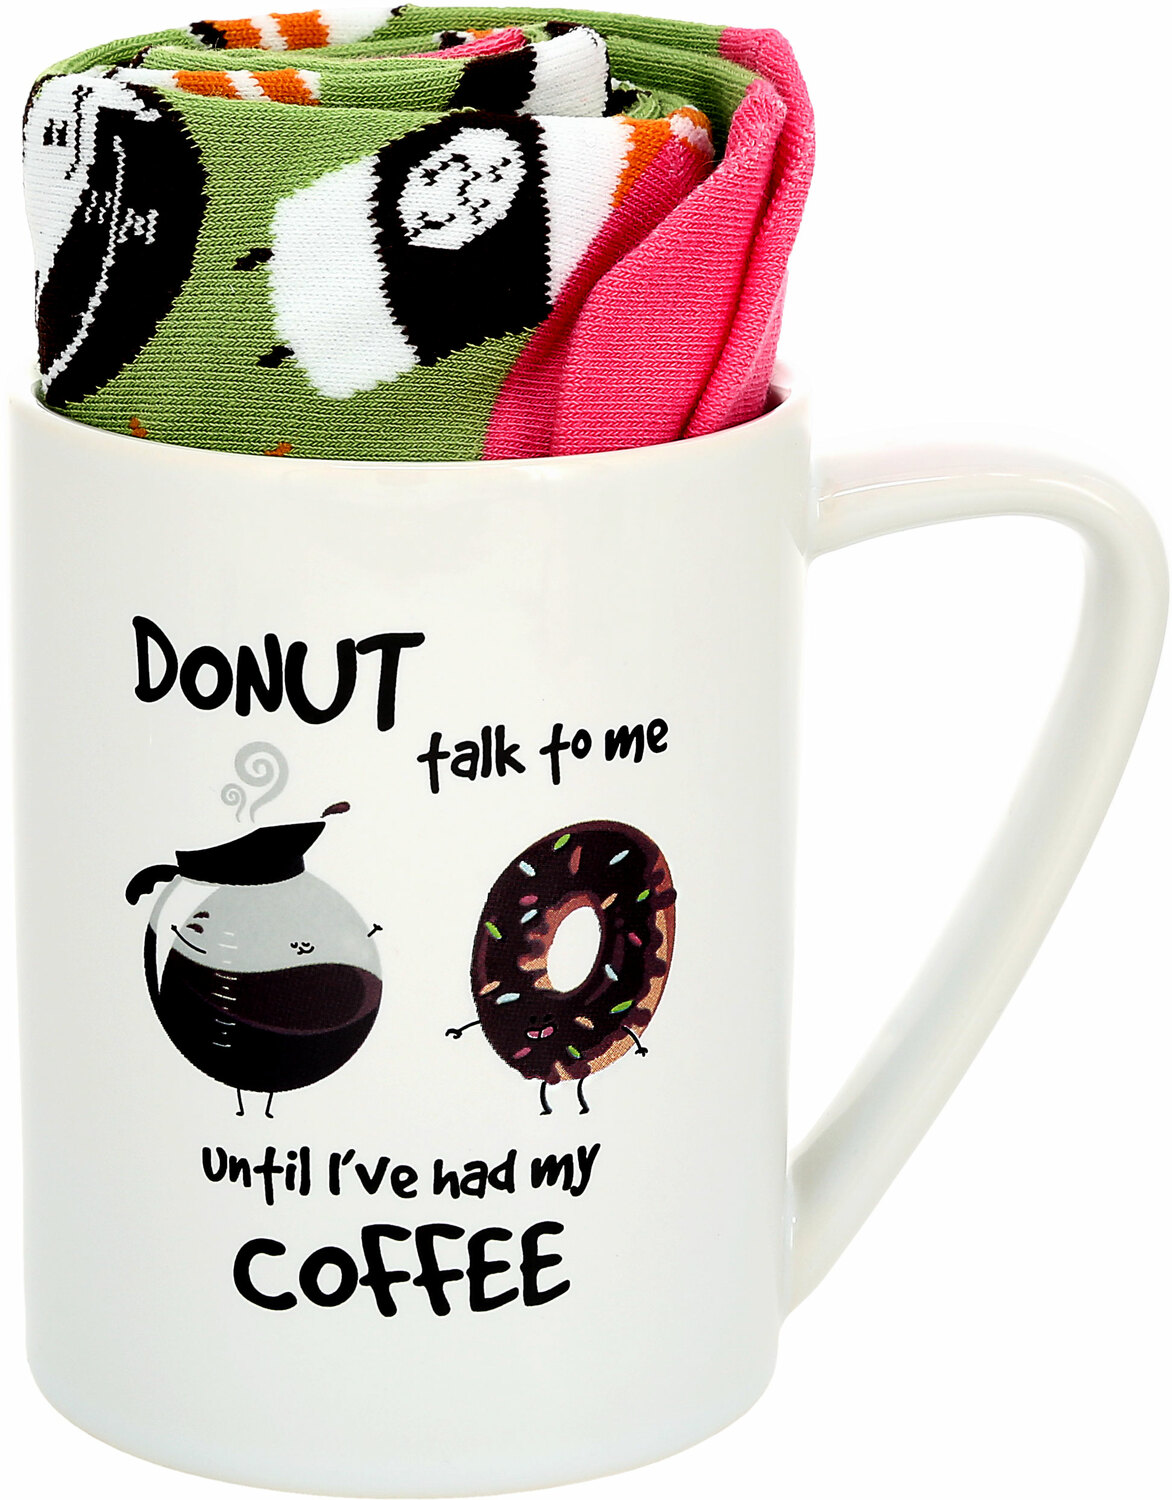 Donut Talk to Me by Late Night Snacks - Donut Talk to Me - 18 oz Mug and Sock Set